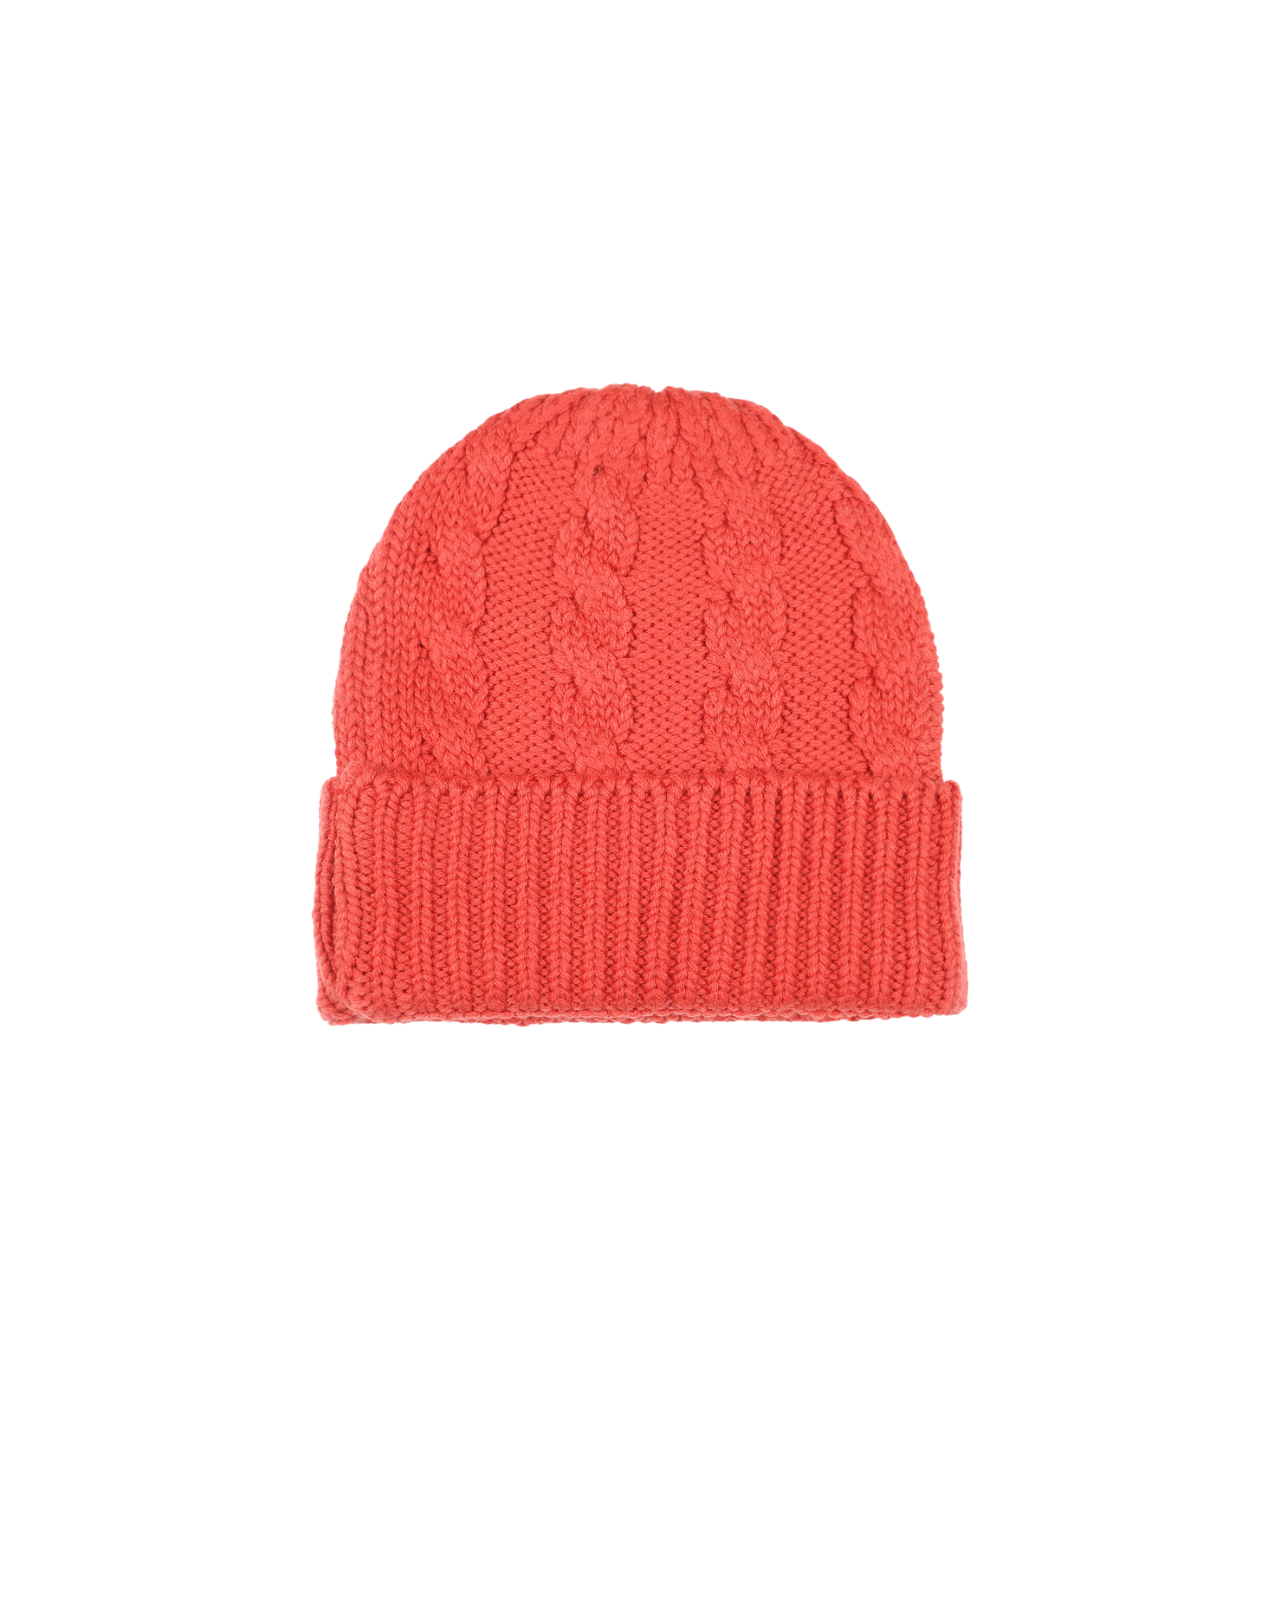 Acrylic Wool Cable Knit Winter Beanie For Men